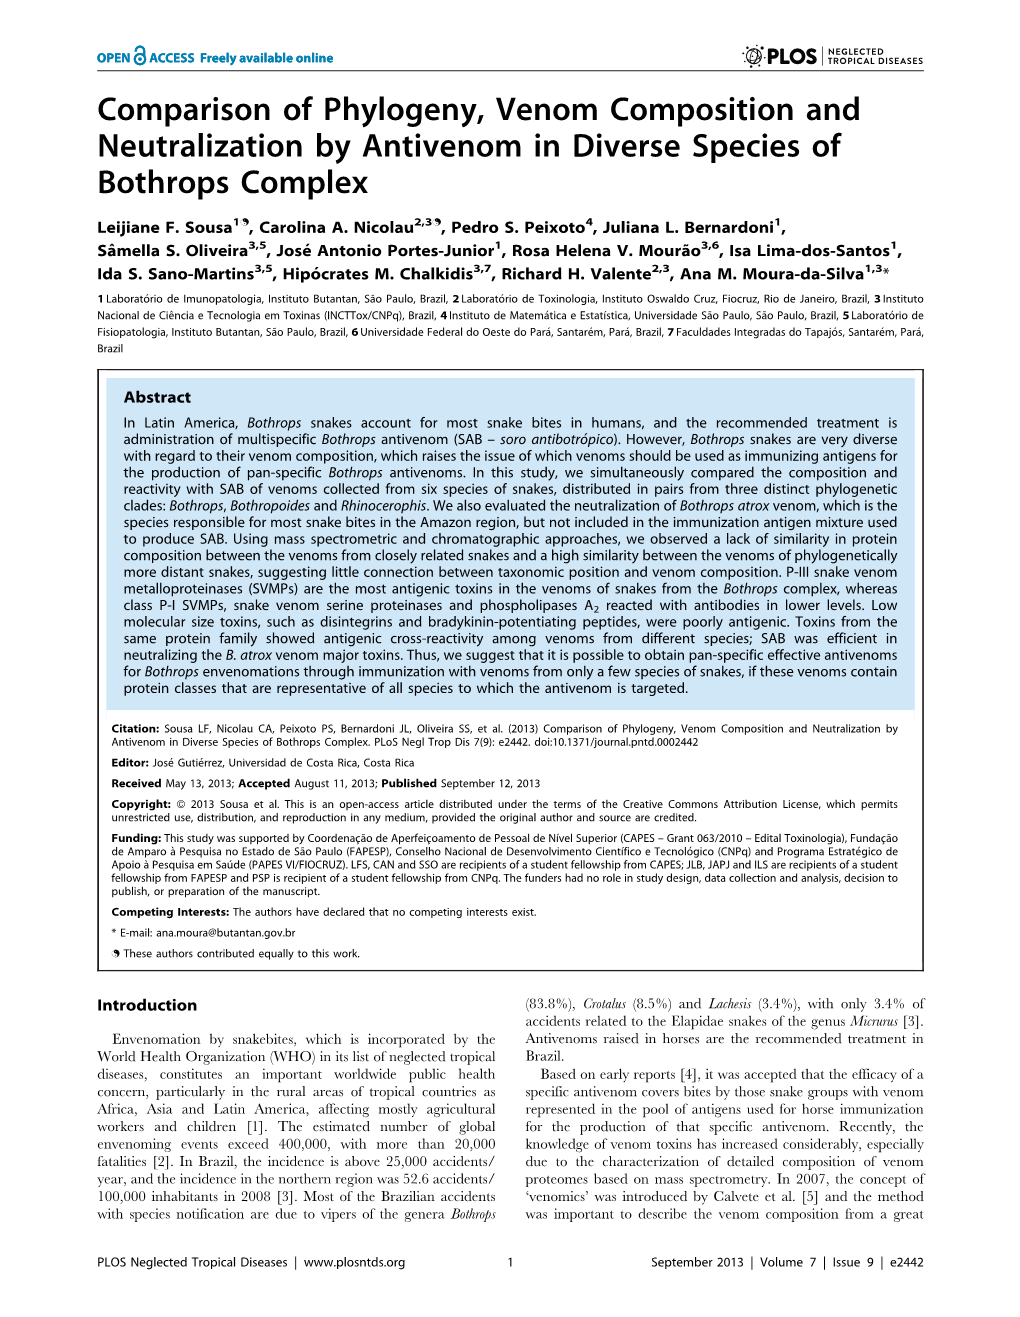 Comparison of Phylogeny, Venom Composition and Neutralization by Antivenom in Diverse Species of Bothrops Complex